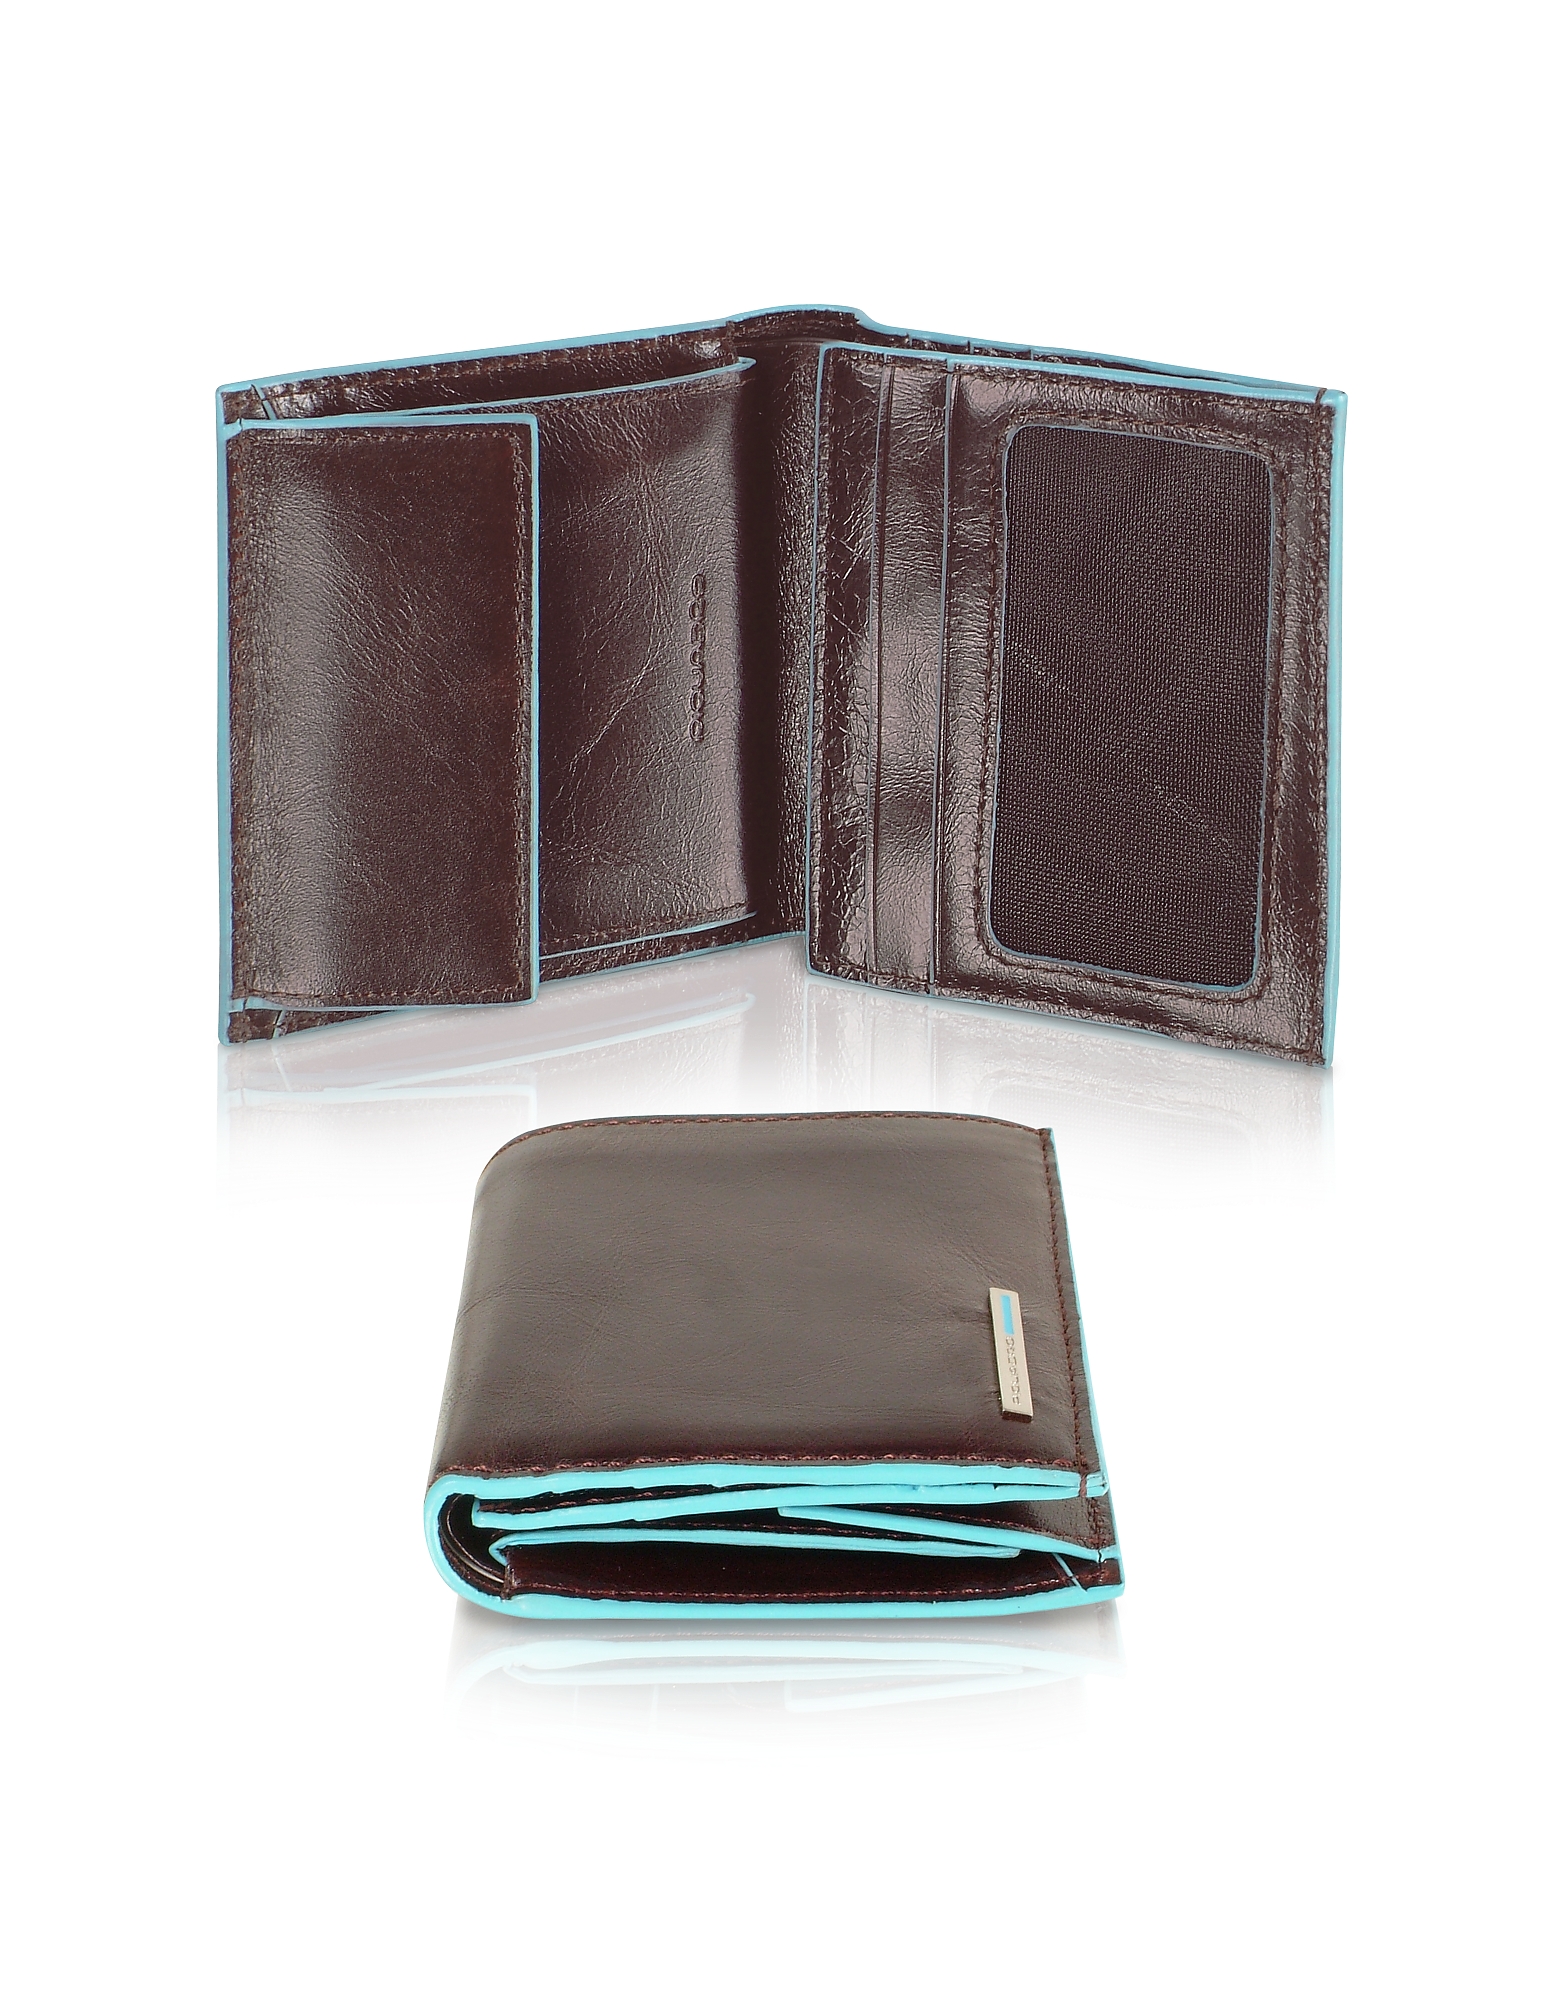 

Blue Square-Men's Leather ID Wallet, Dark brown